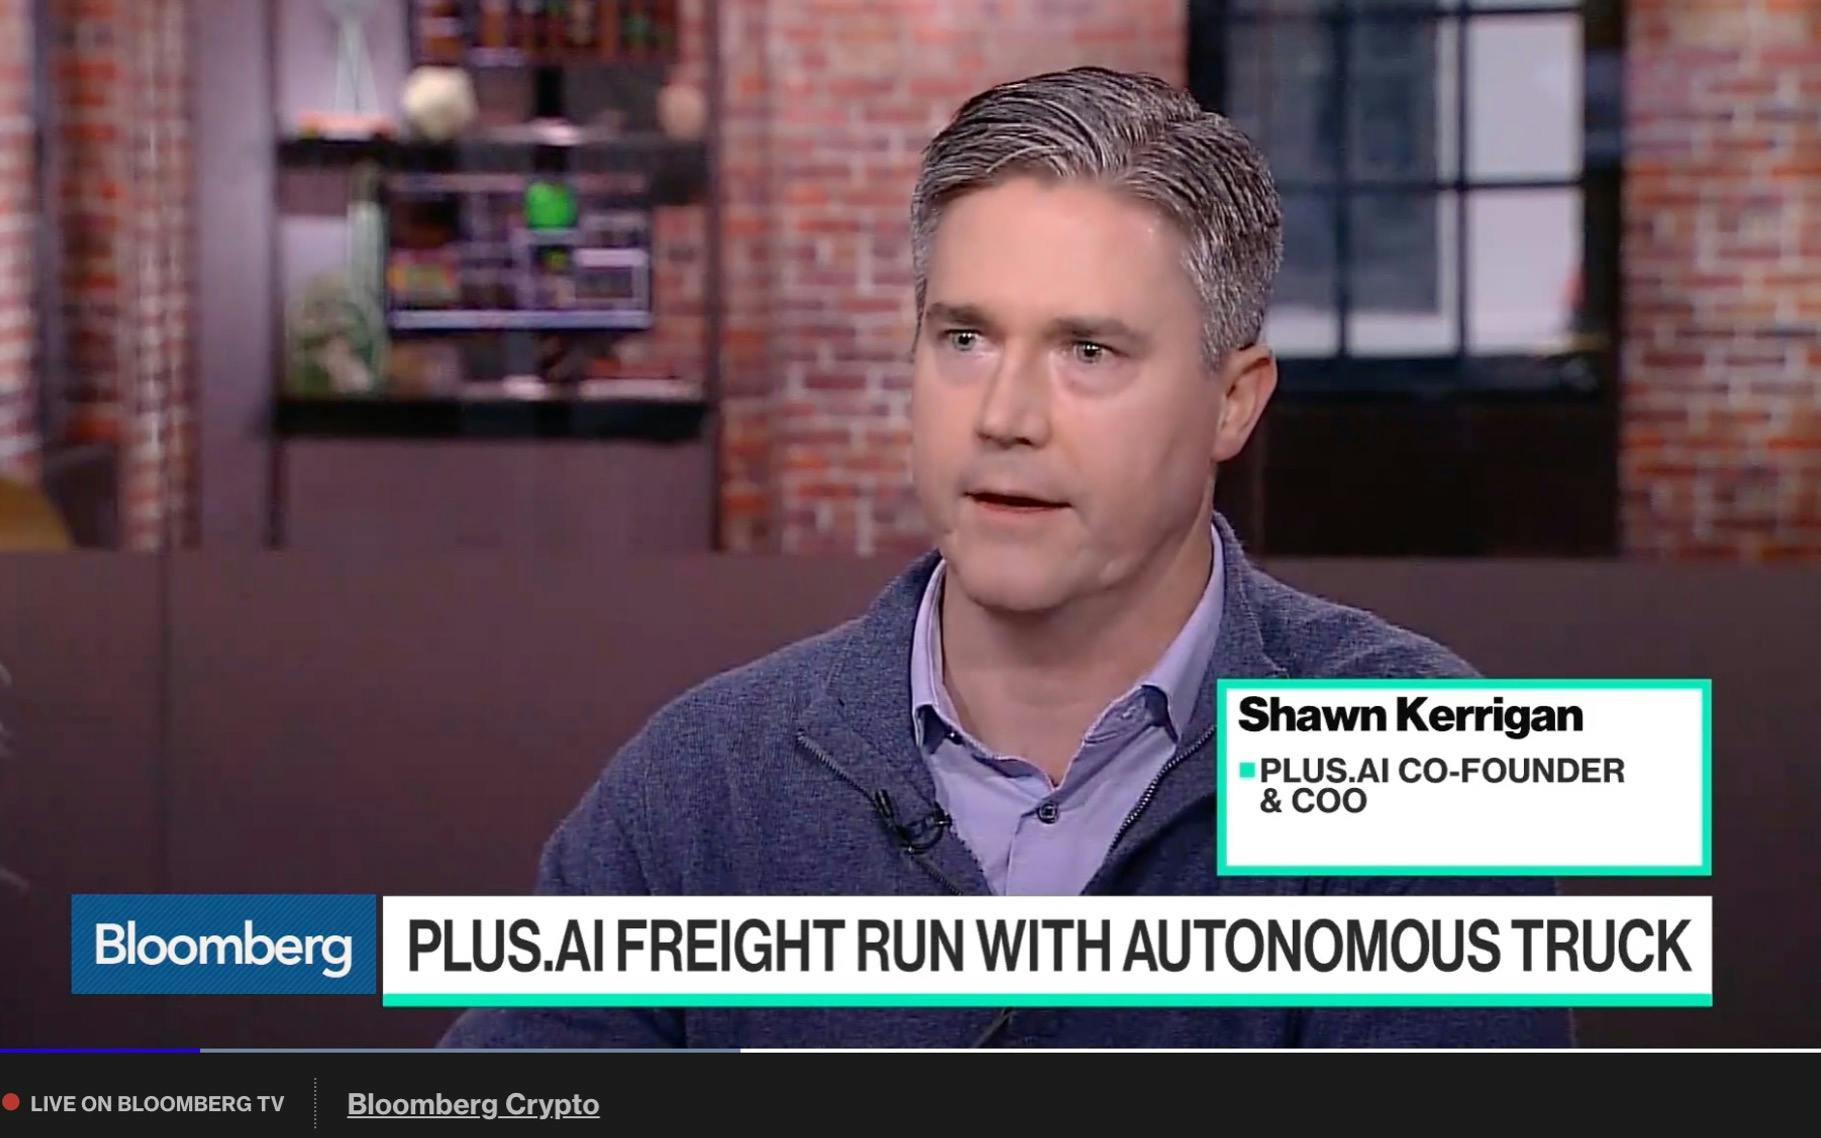 Shawn Kerrigan Plus Co-Founder & COO on Bloomberg